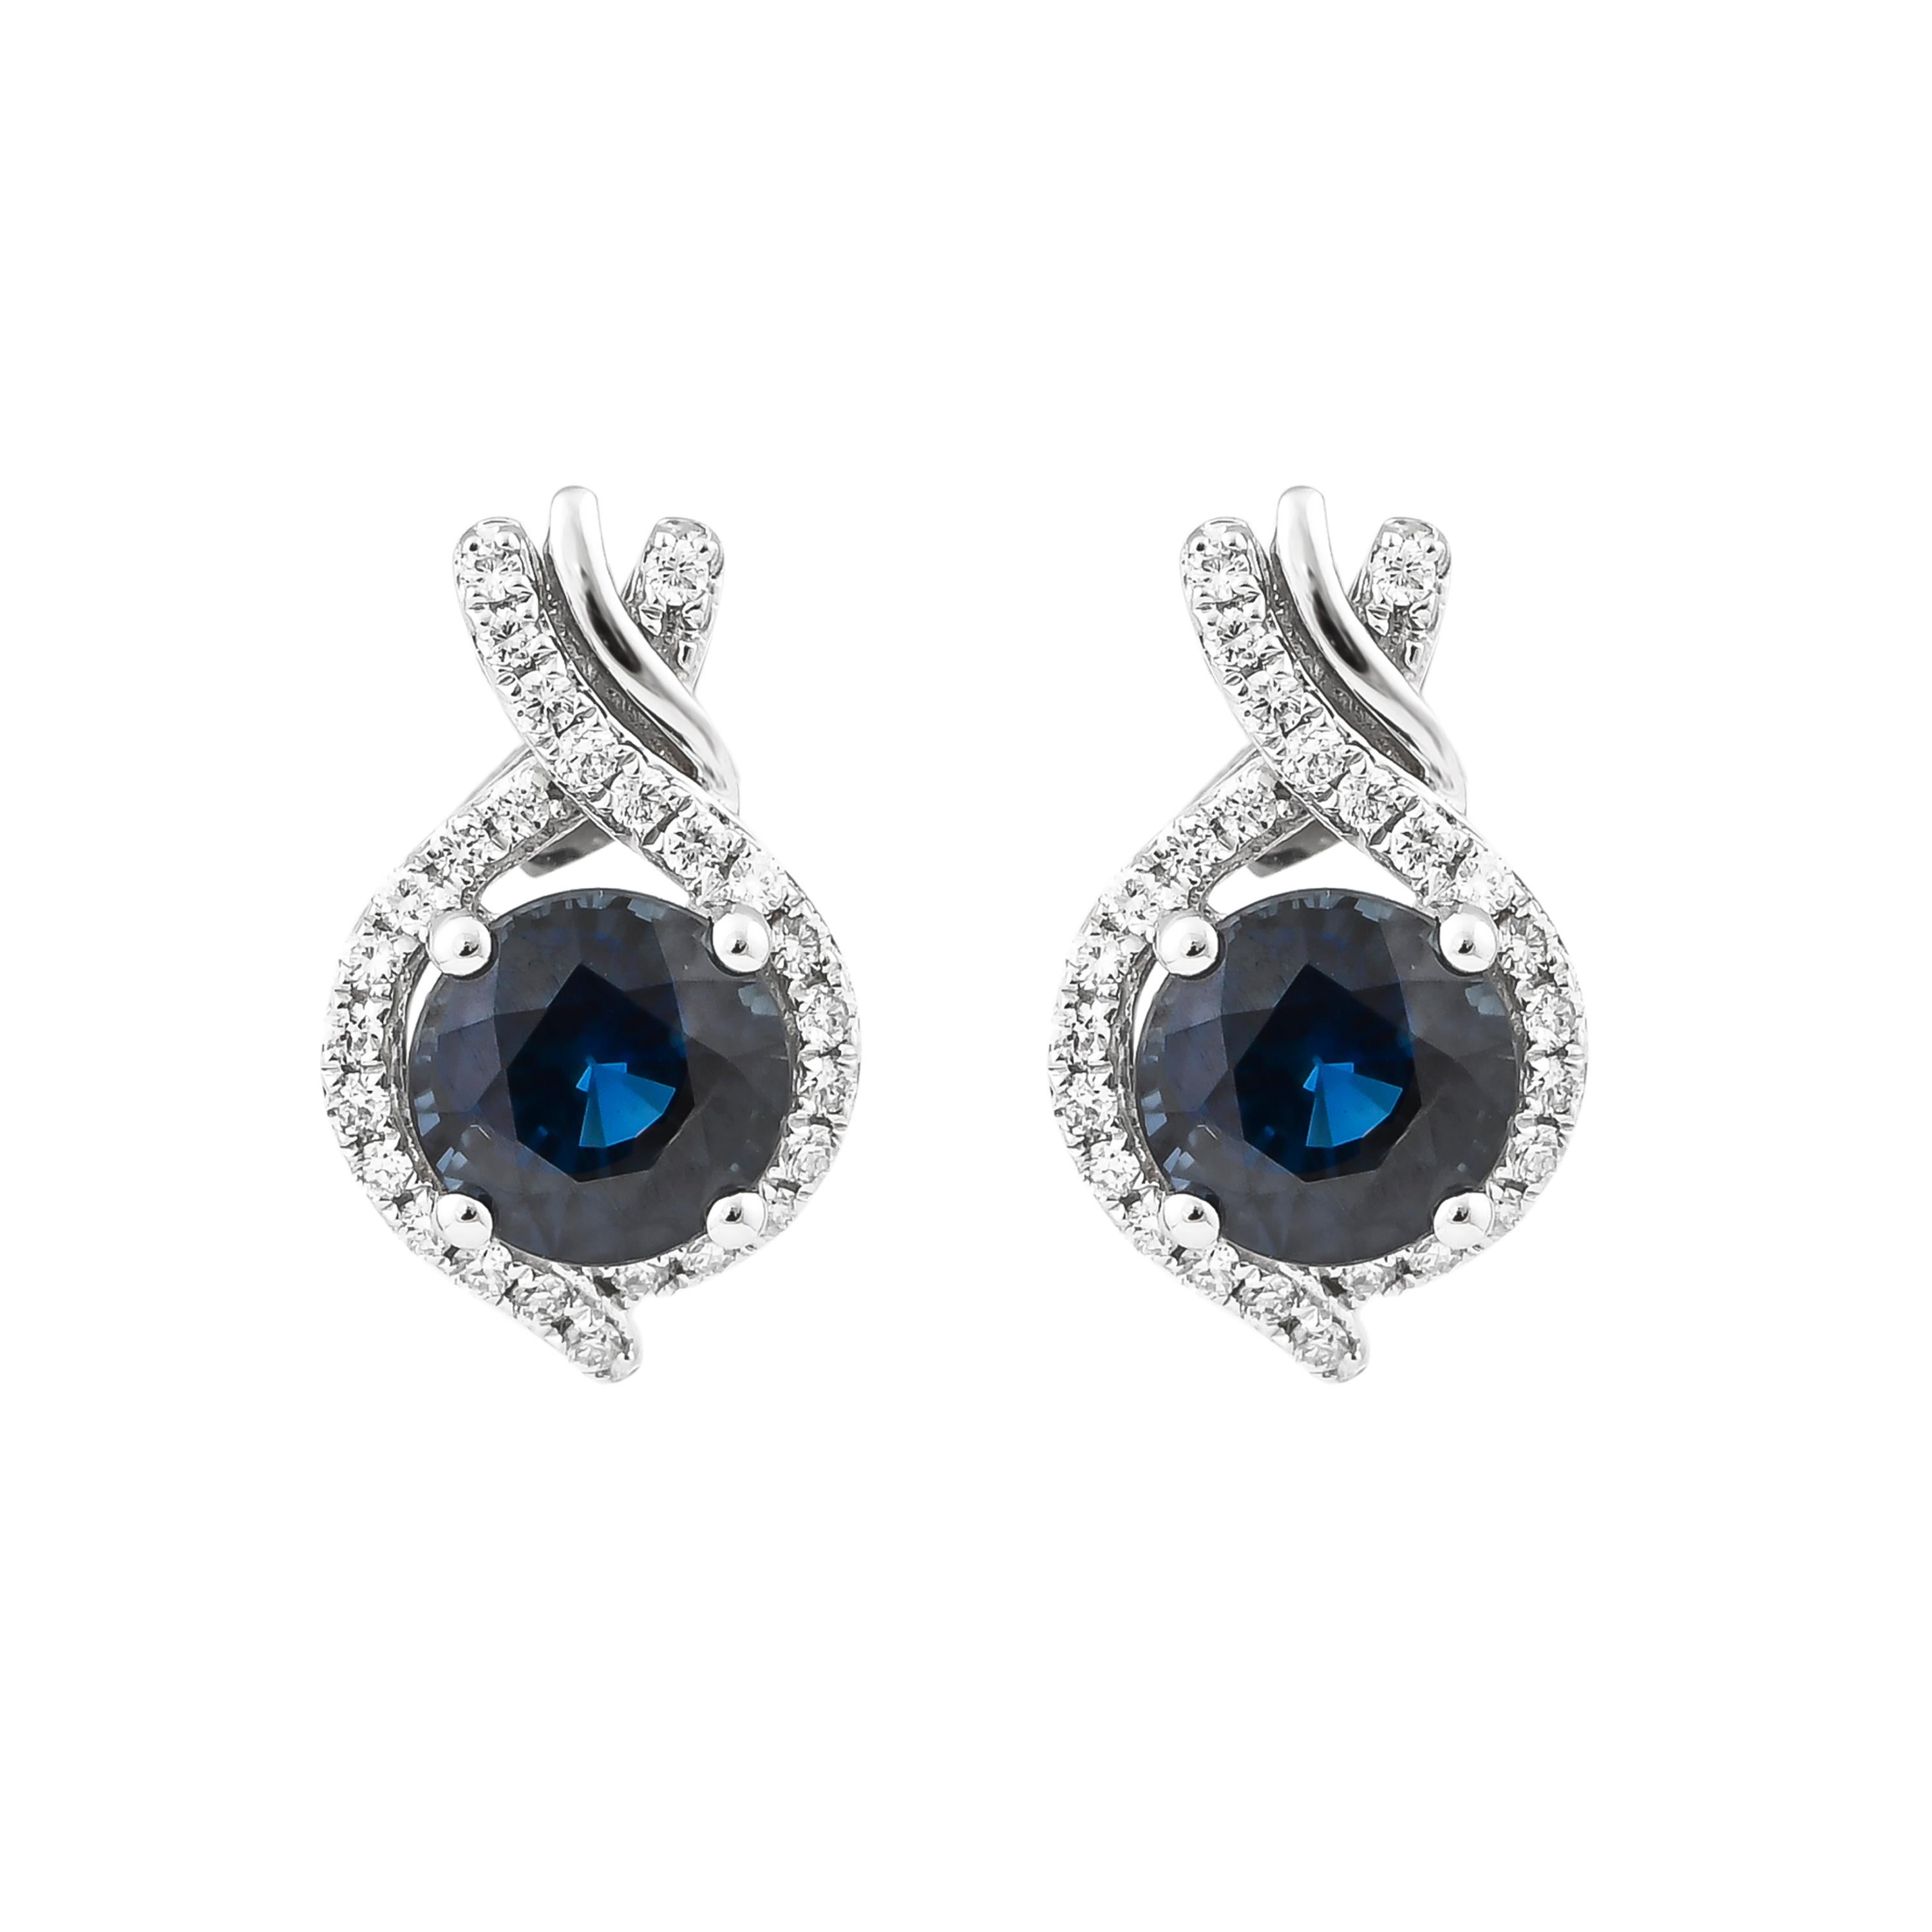 This collection features a dainty selection of jewelry with blue sapphires and diamonds. These Blue Sapphires are sourced from Madagascar and project a bold blue hue. Accented with diamonds, these minimal pieces can be the perfect accessory to your